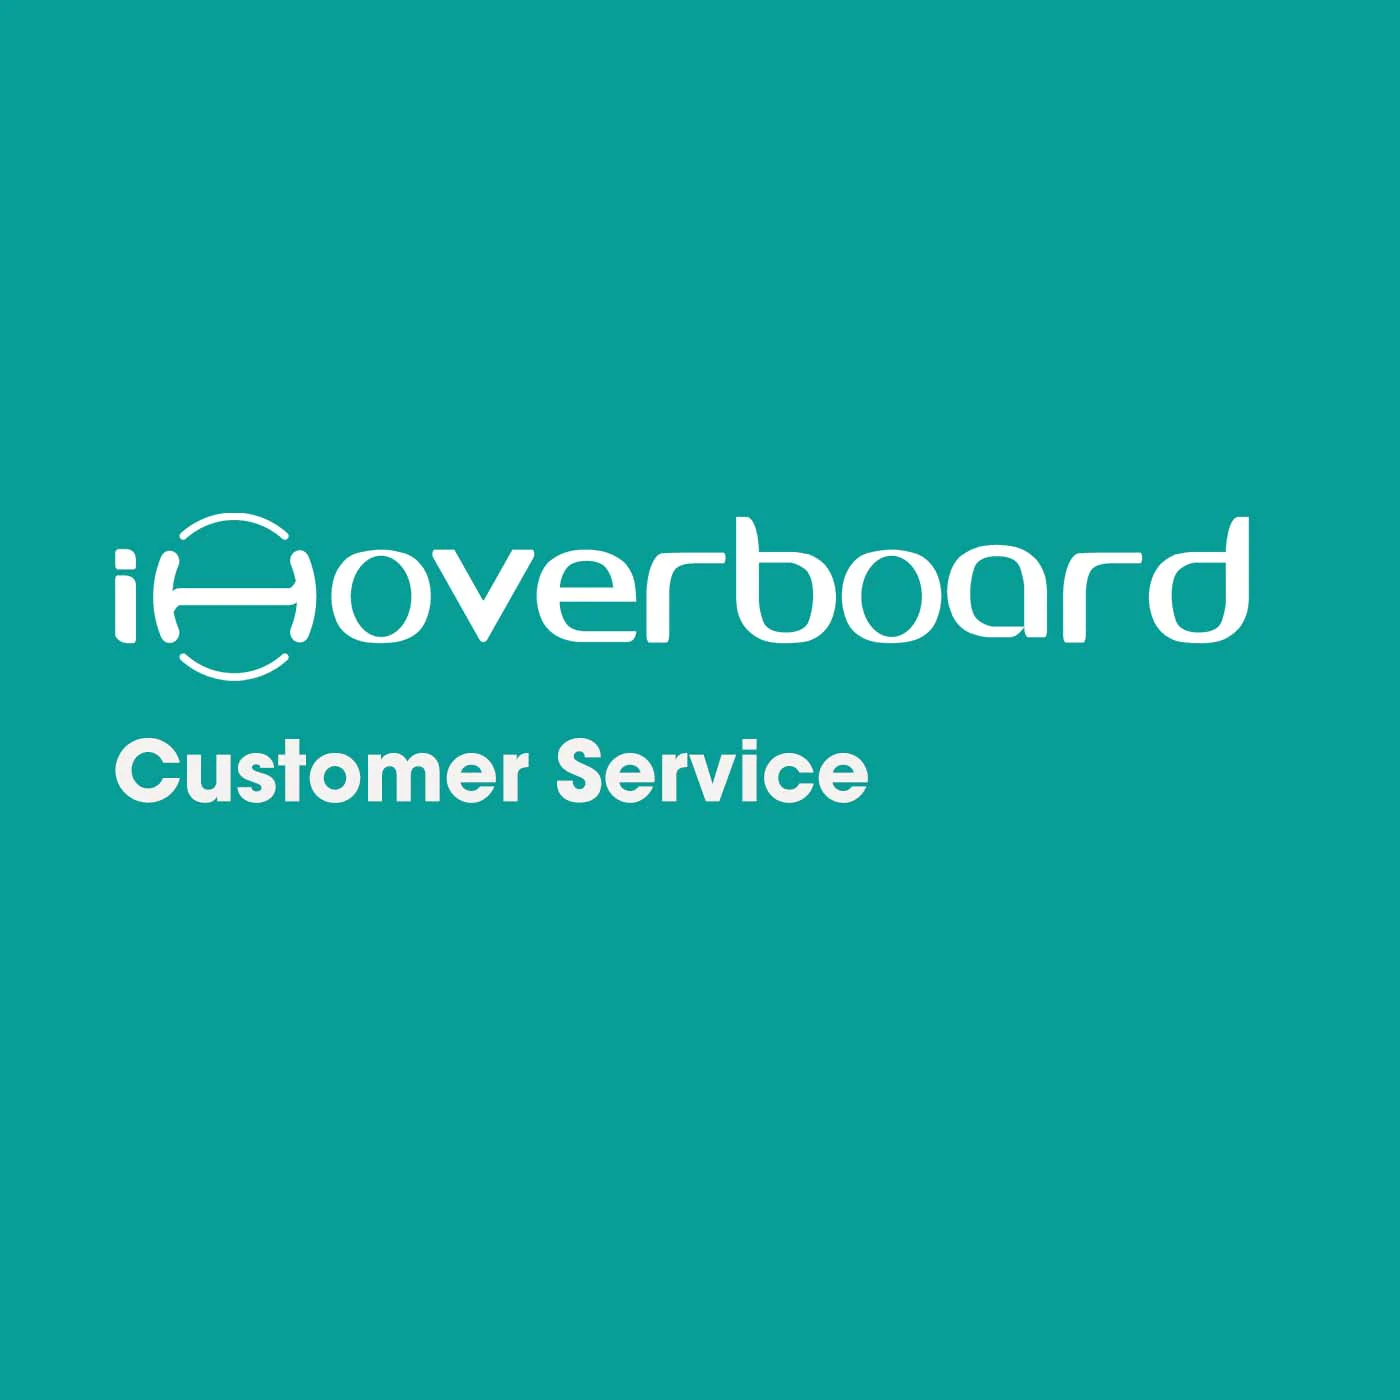 iHoverboard ® Service Client